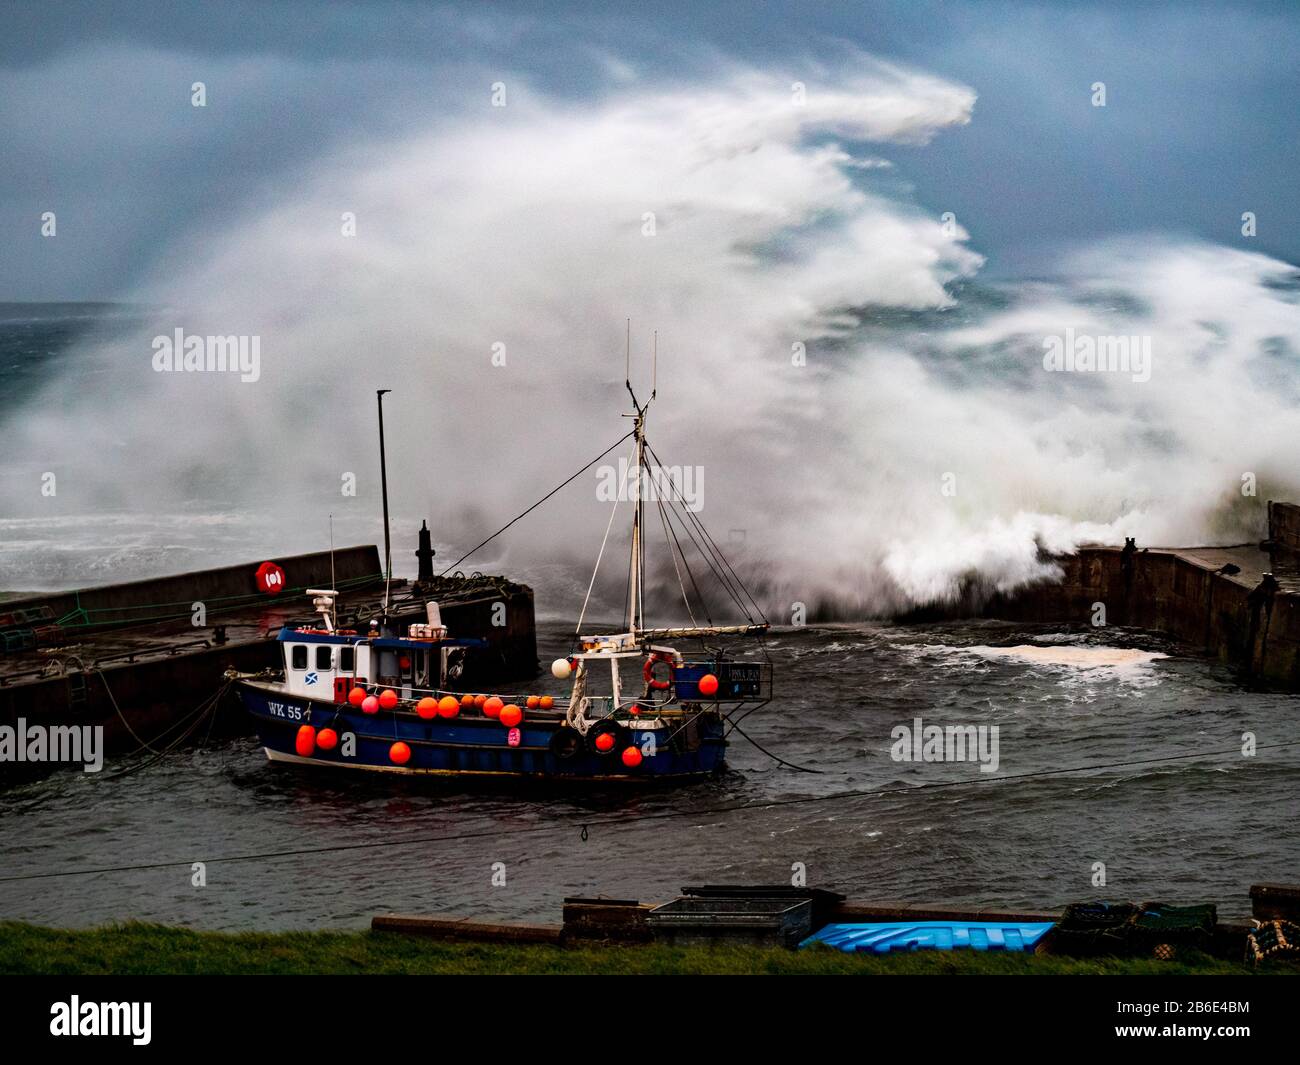 A wave crashes over the harbour wall protecting a fishing boat at John o'Groats, Highlands, Scotland, UK, Europe Stock Photo